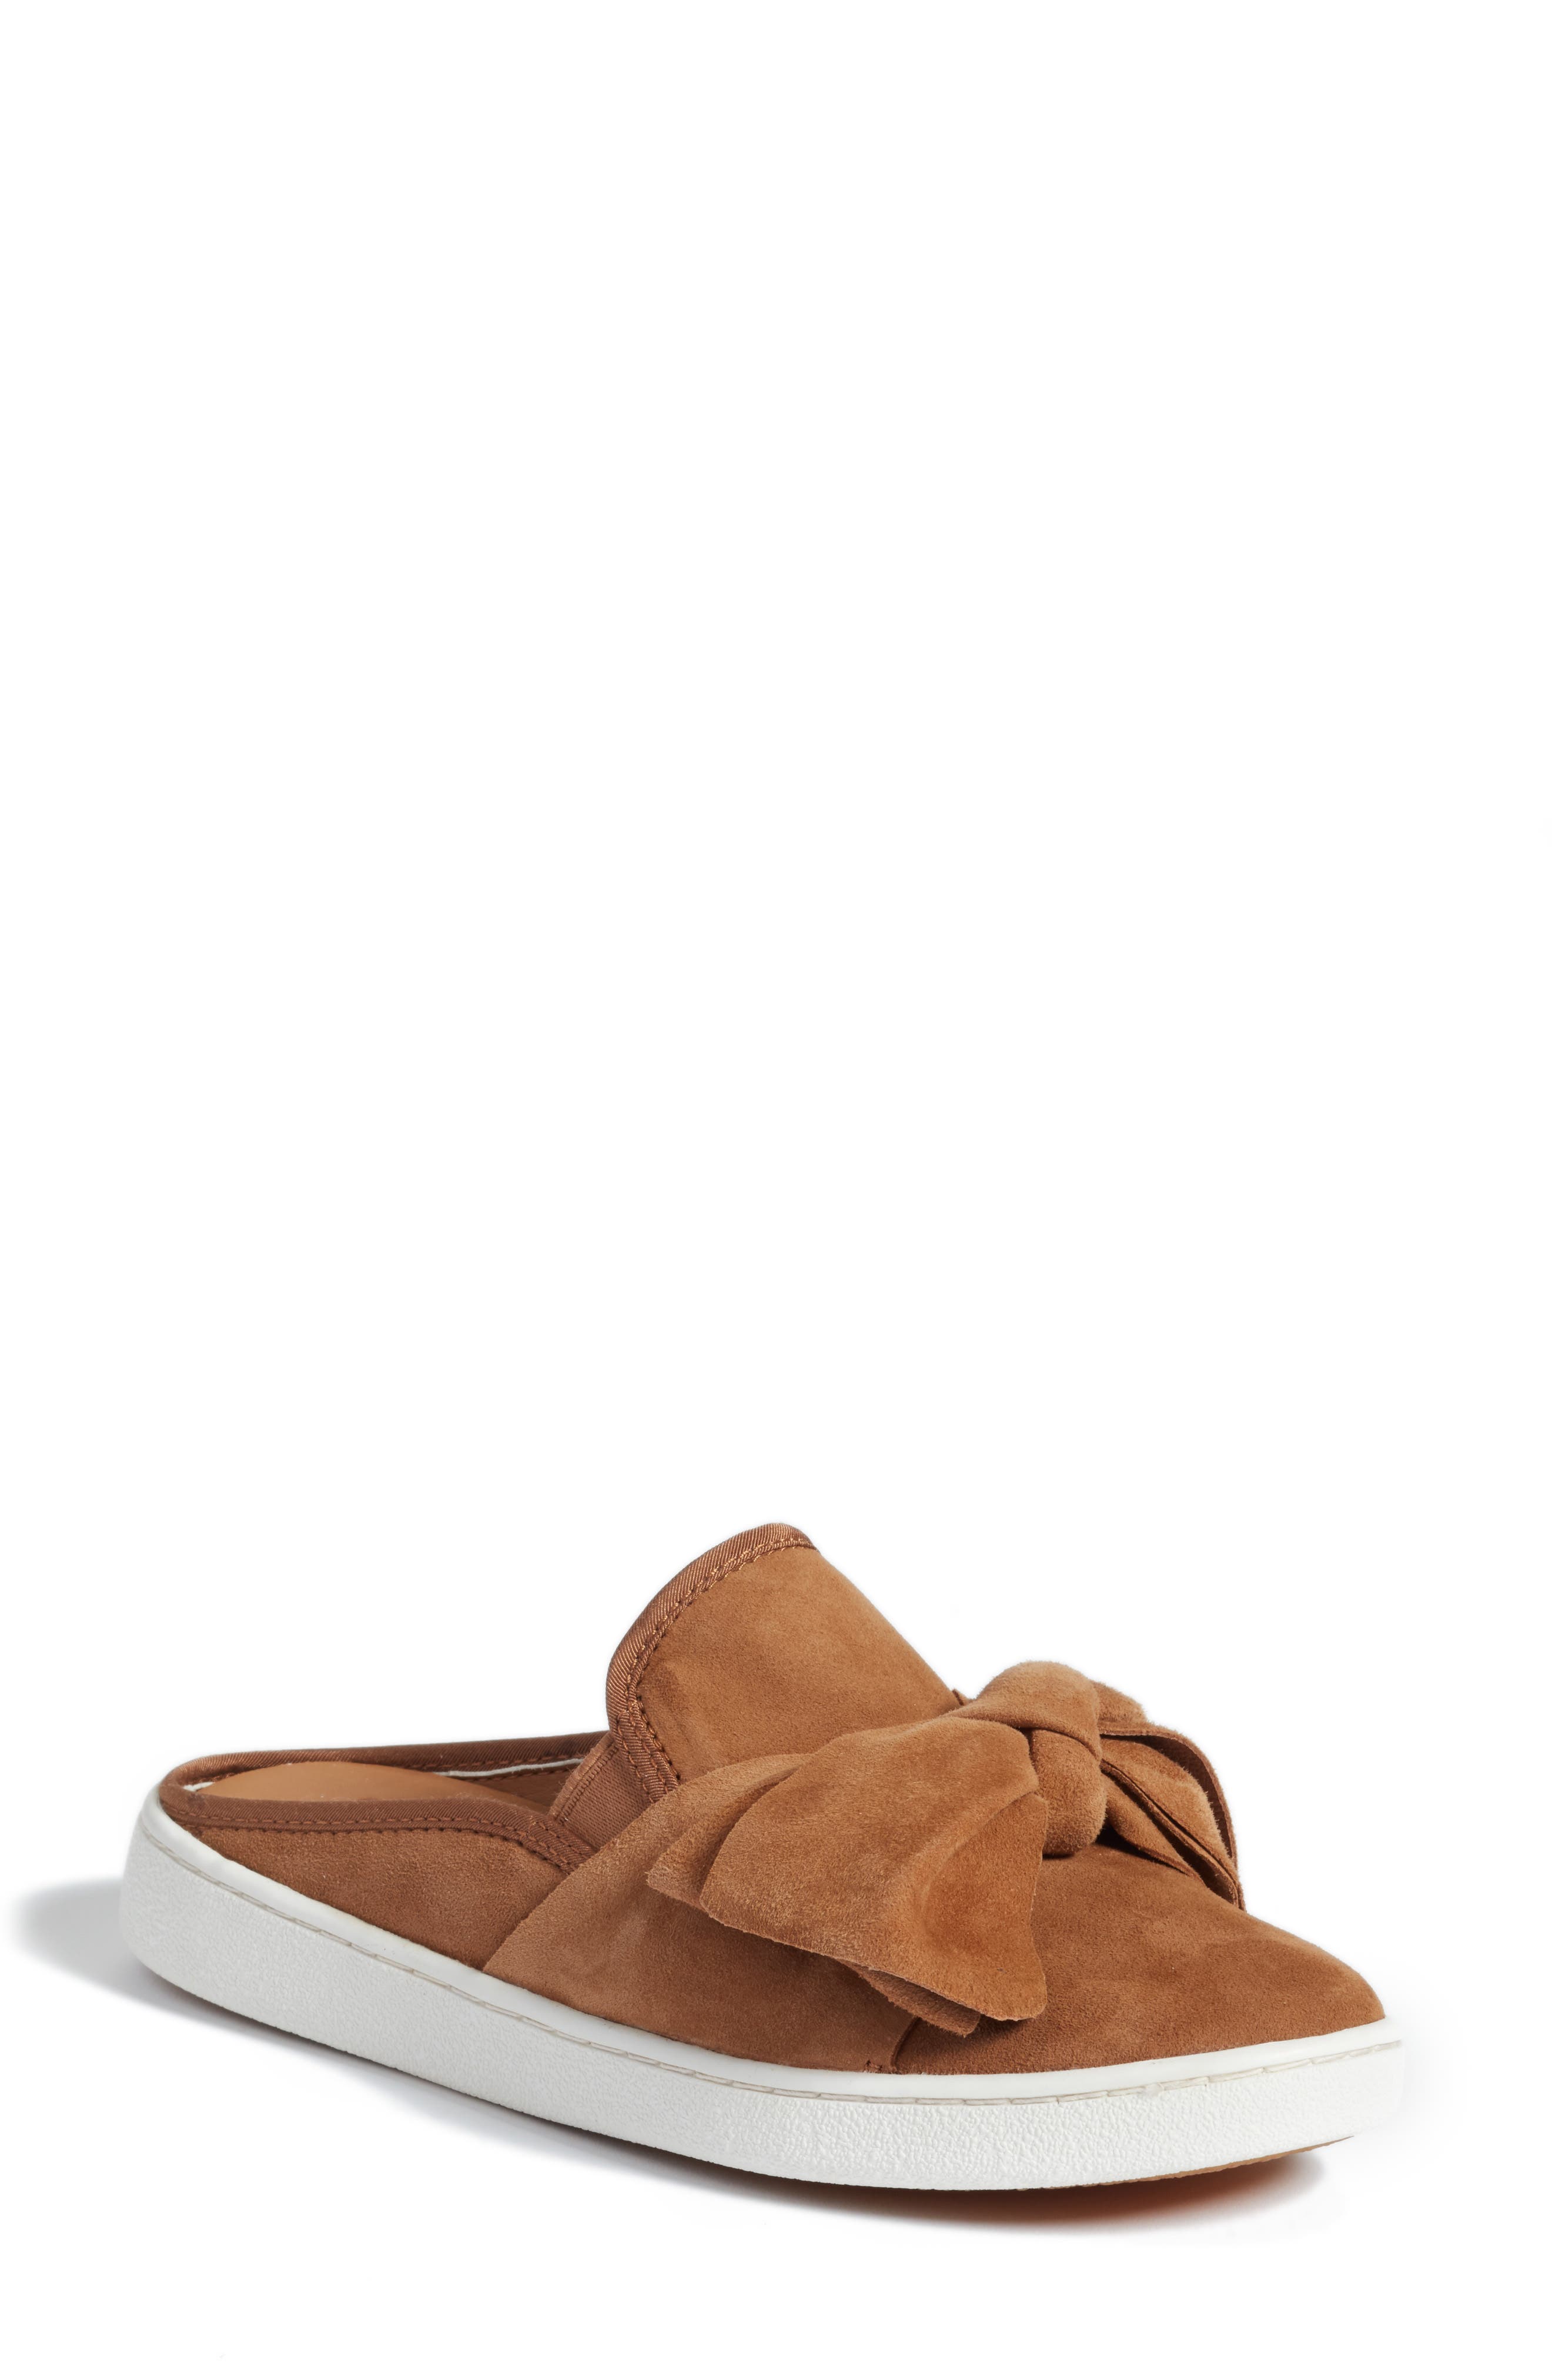 UGG | Luci Bow Sneaker Mule | Nordstrom 